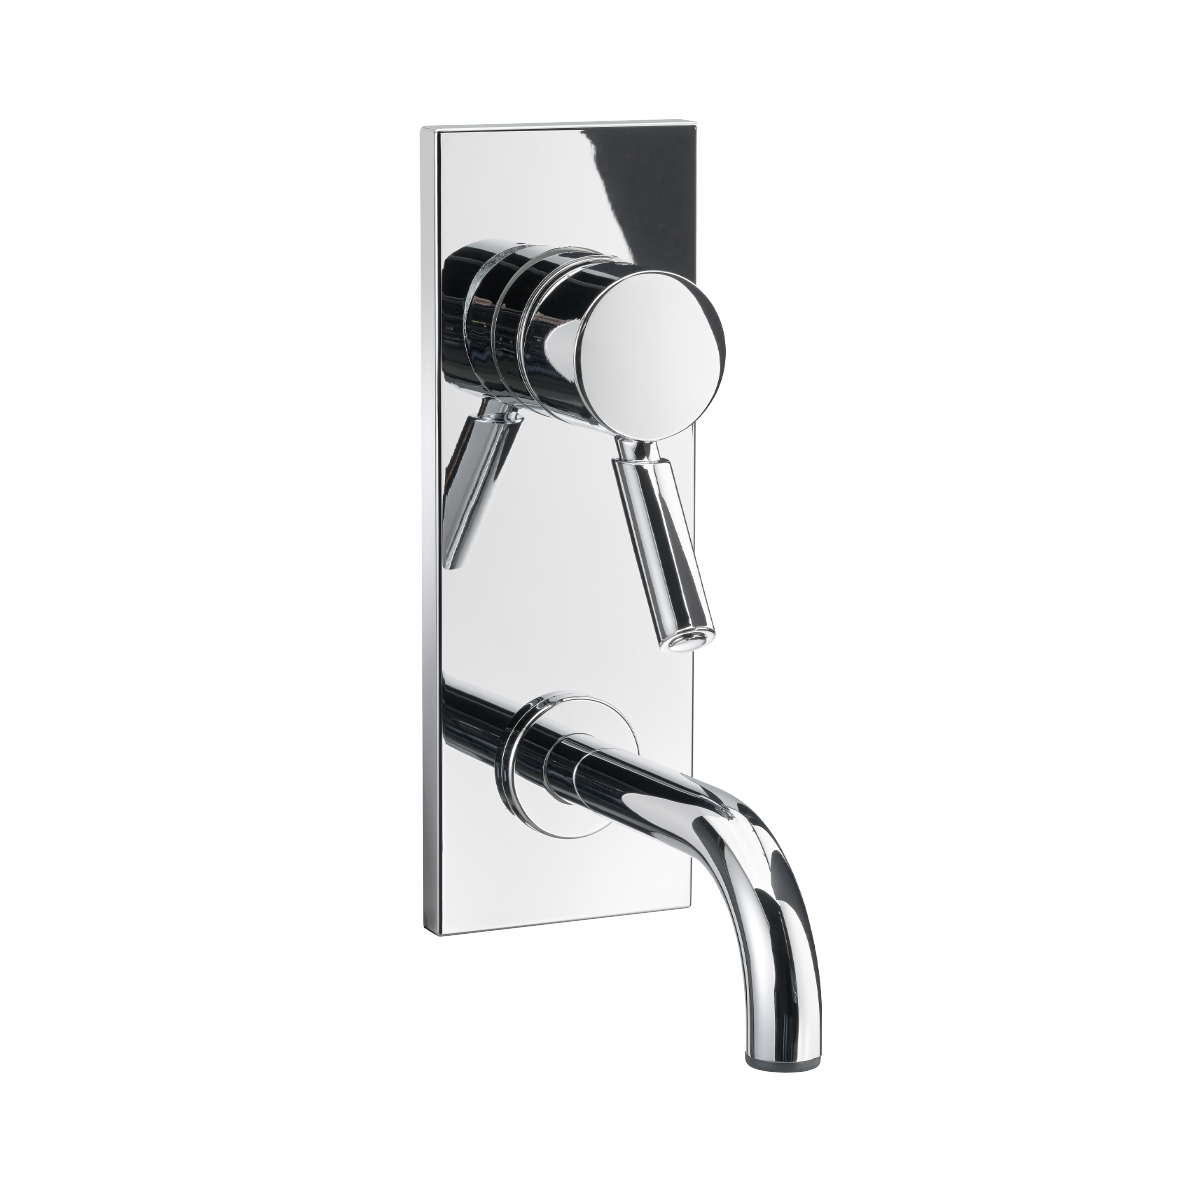 TREND Eco with fixed spout, curved